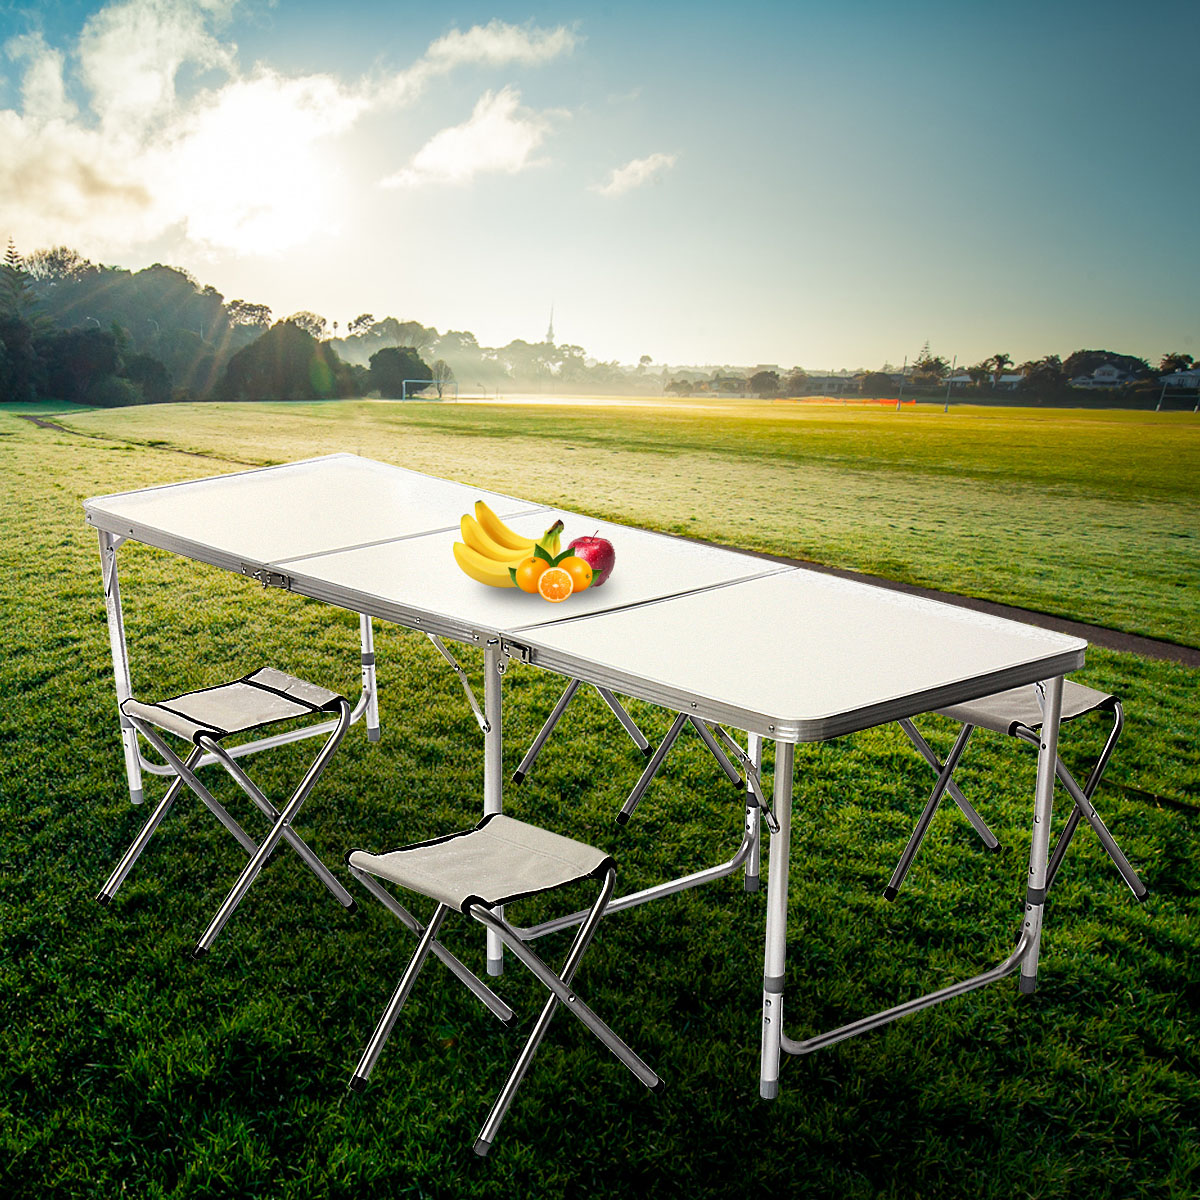 Bring a portable outdoor camping folding table and chairs for a picnic